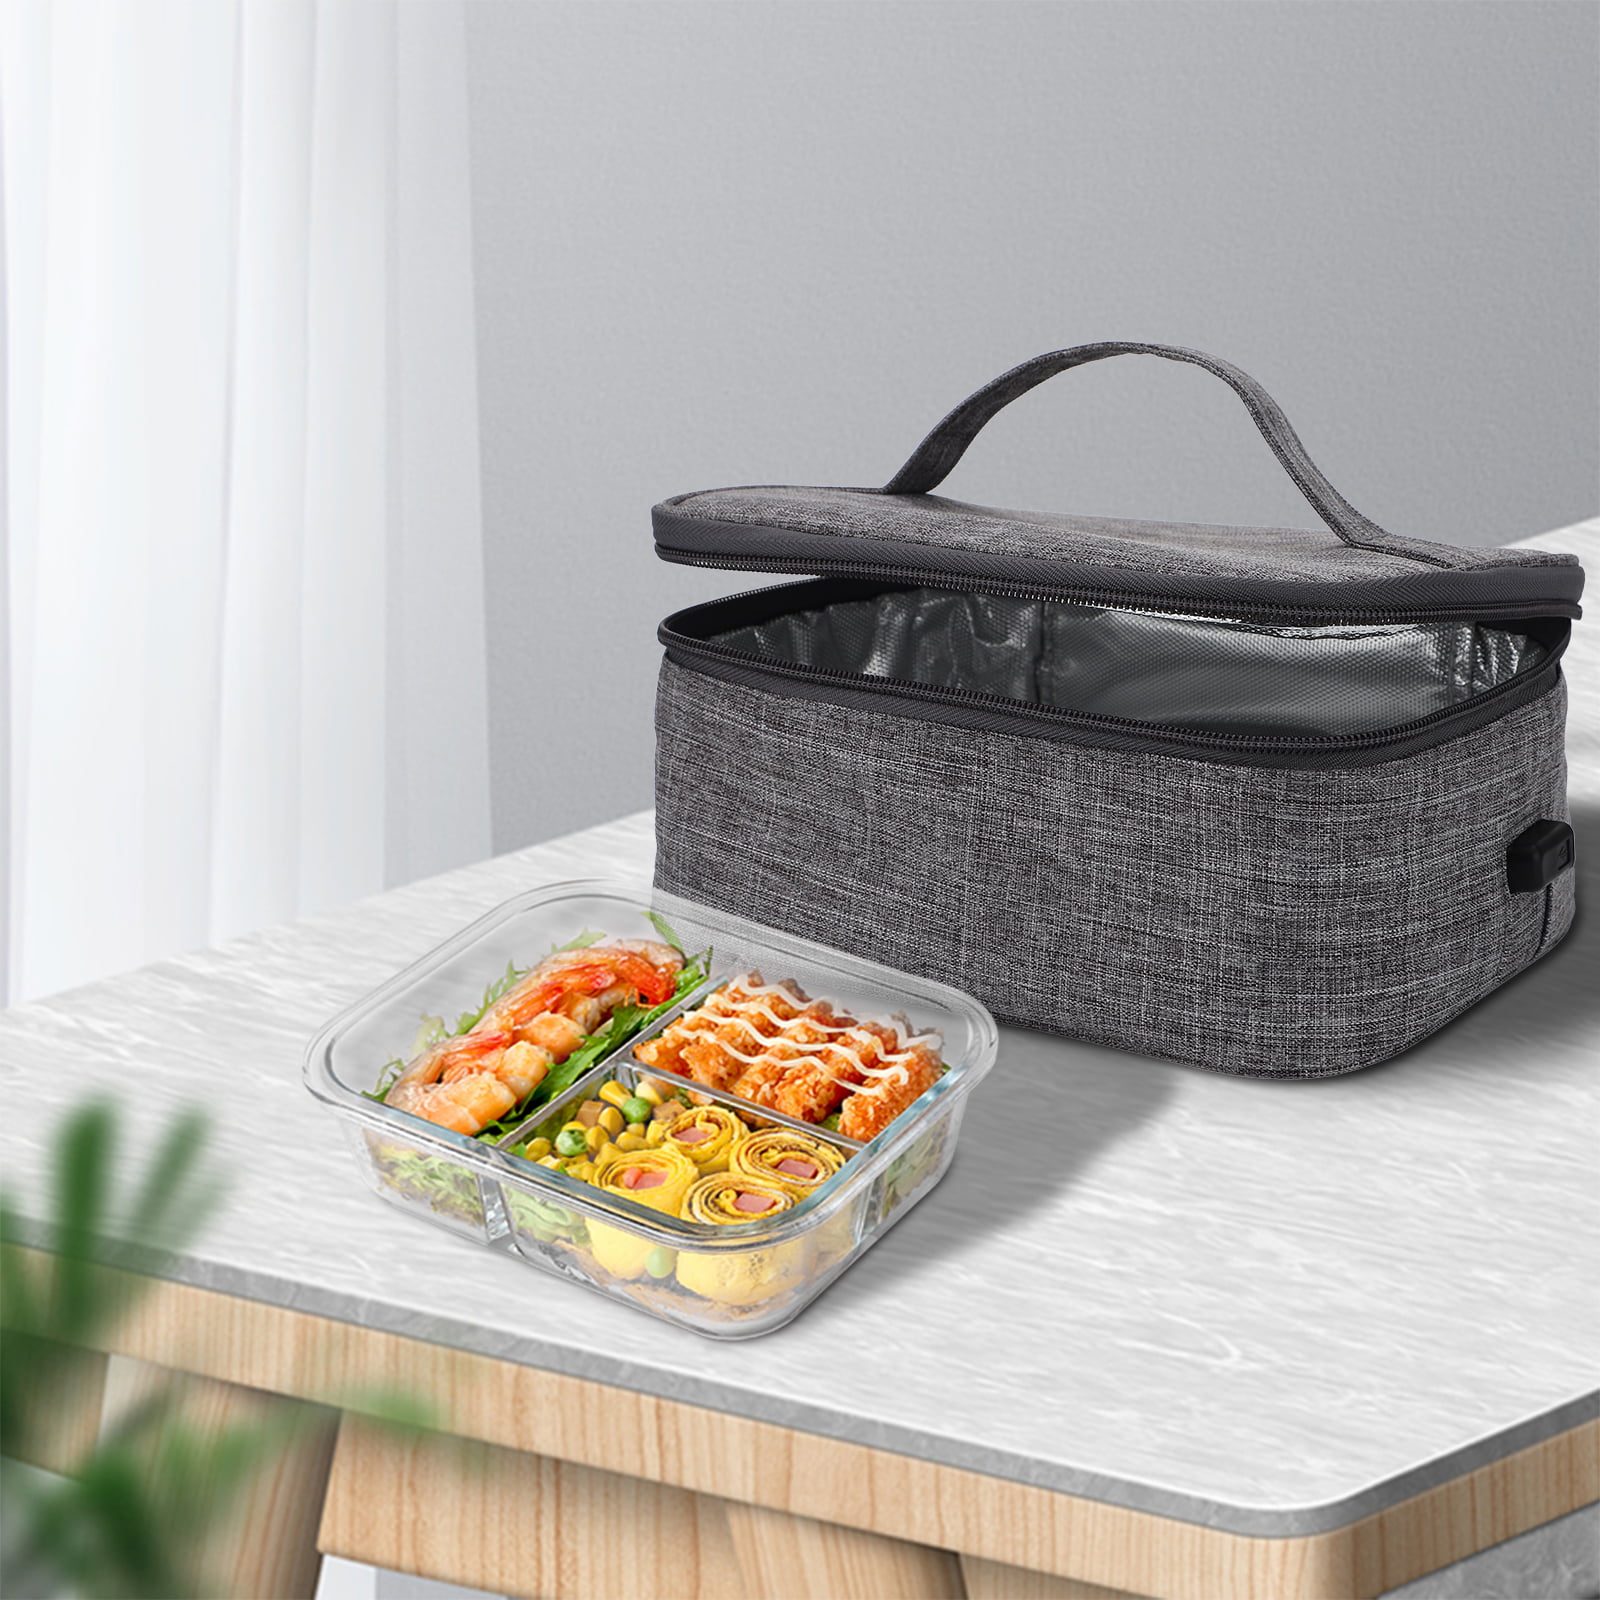 NEW Portable Food Warmers Heater Lunch Box Mini Oven Microwave for Travel  Office